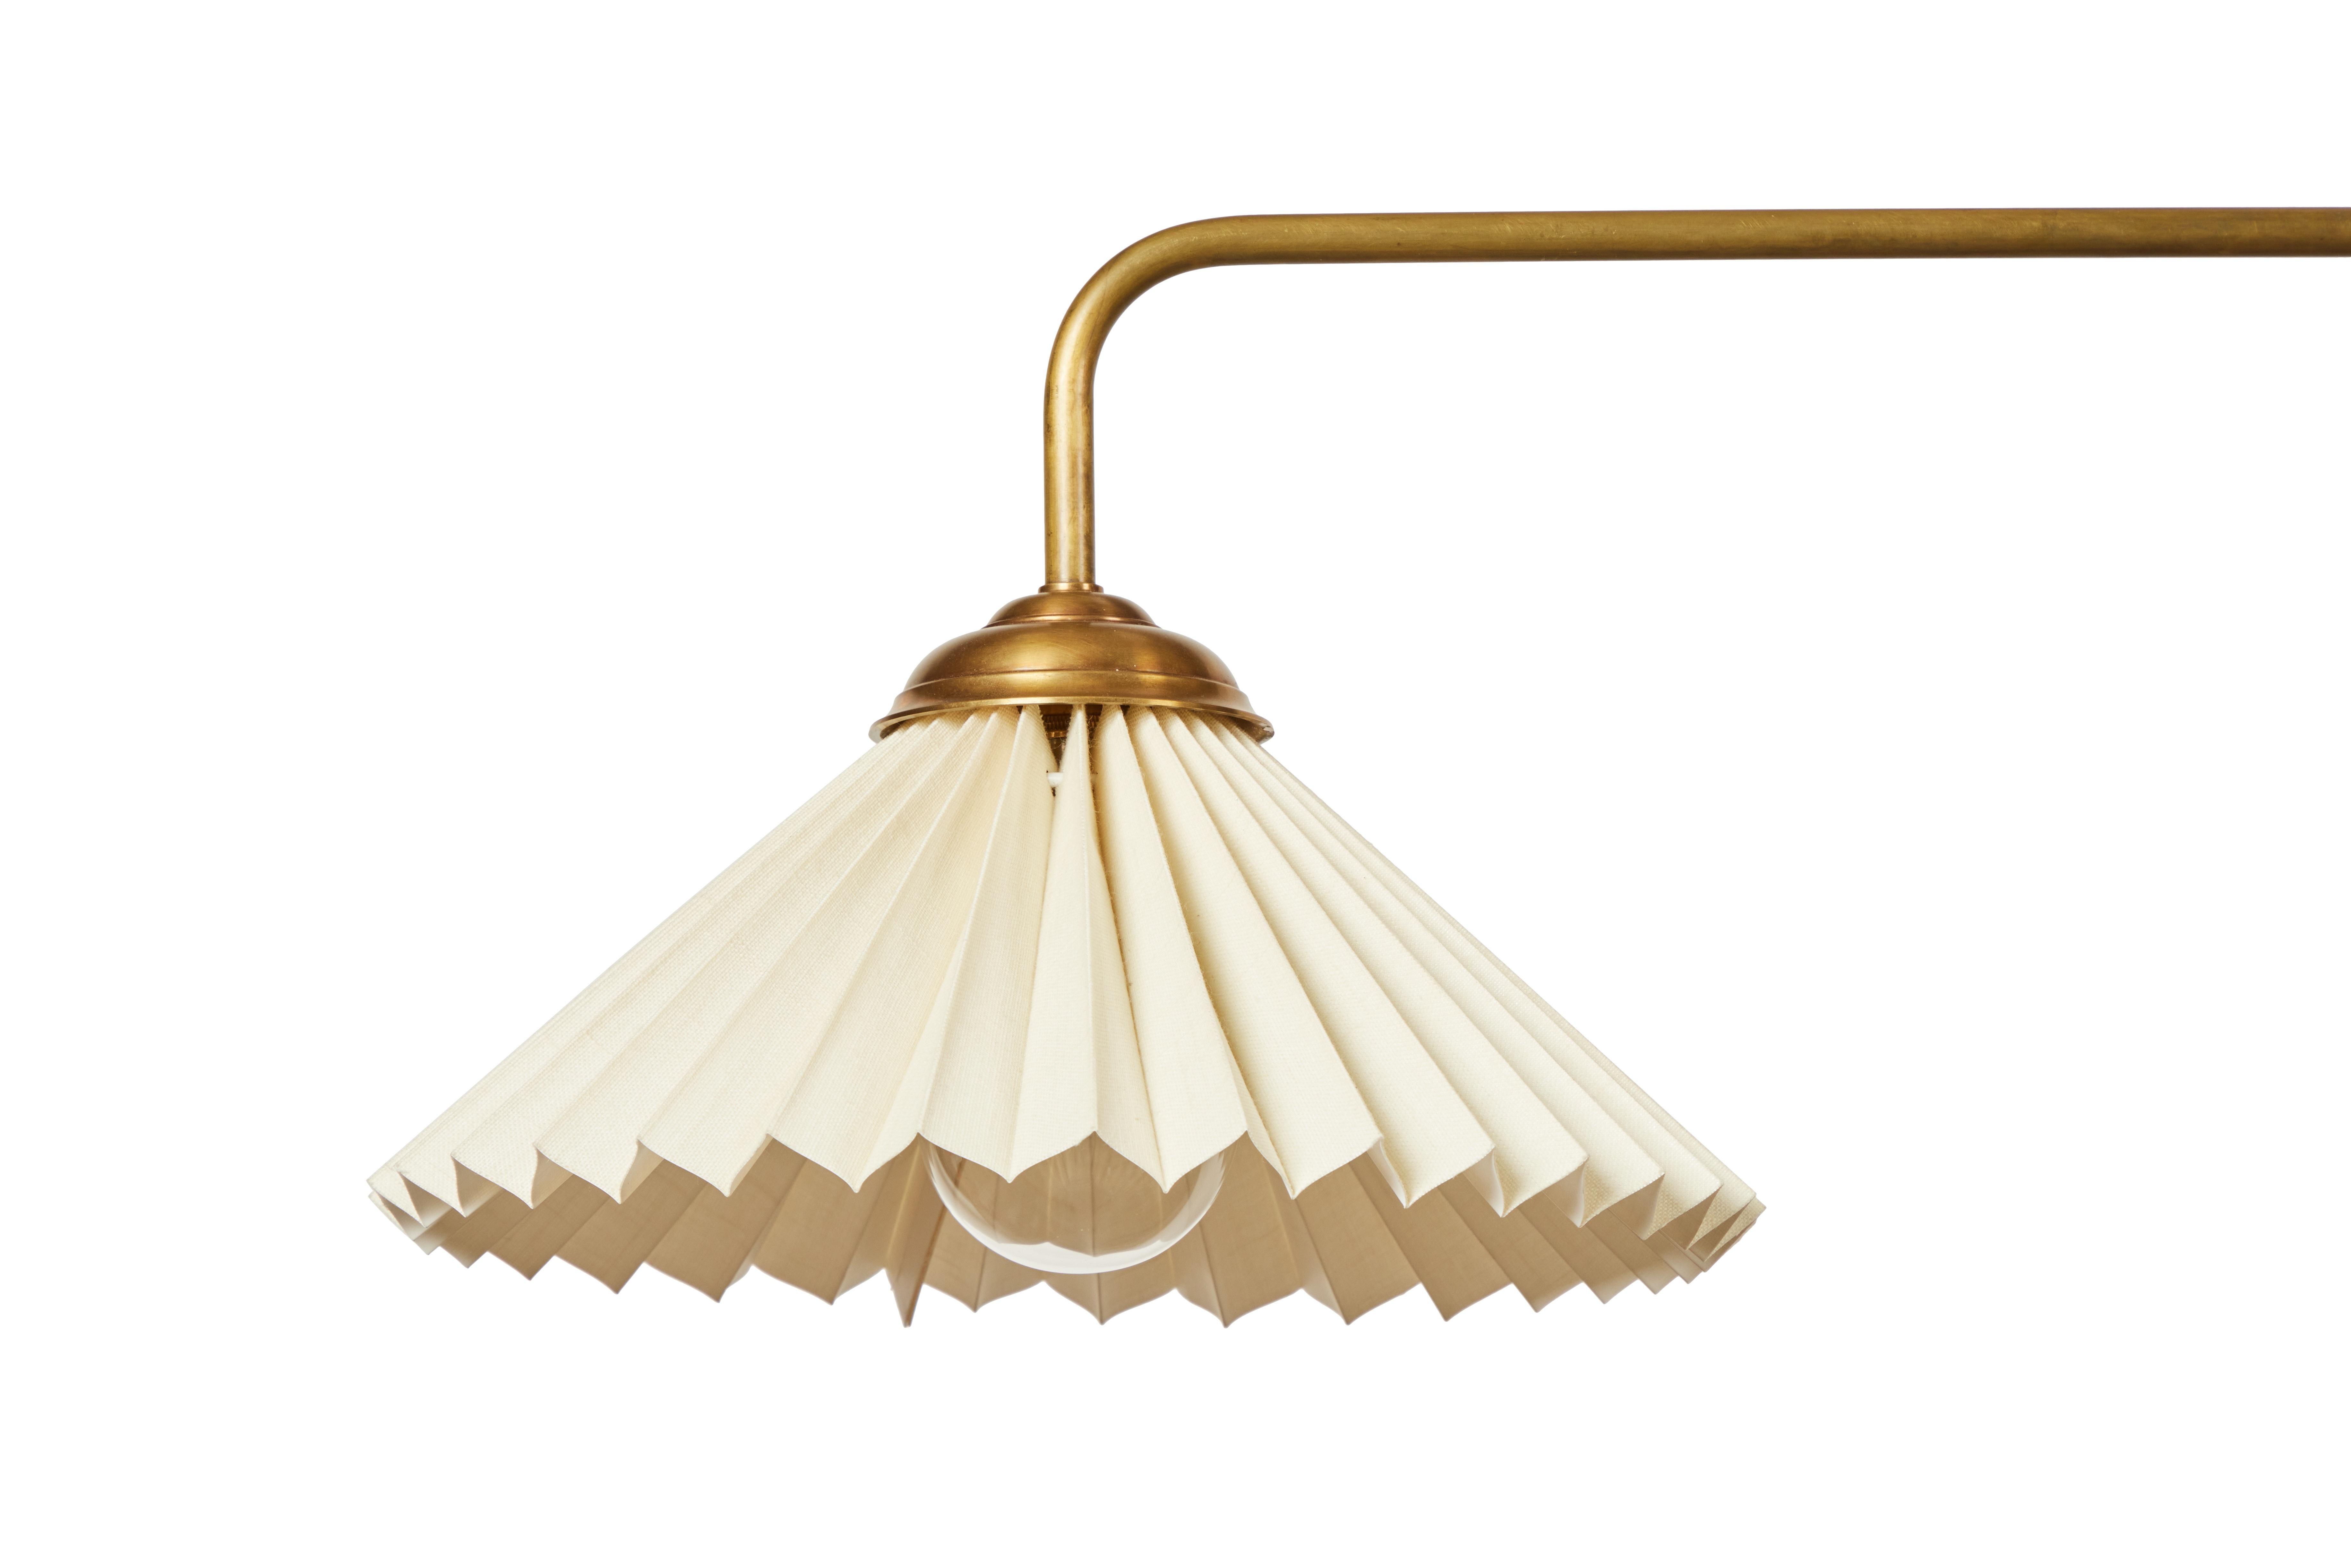 The Fan chandelier is a two light linear pendant in aged unlacquered brass. It features a cream linen pleated shade.

LEAD TIME: 10-15 weeks
 
DIMENSIONS: 28